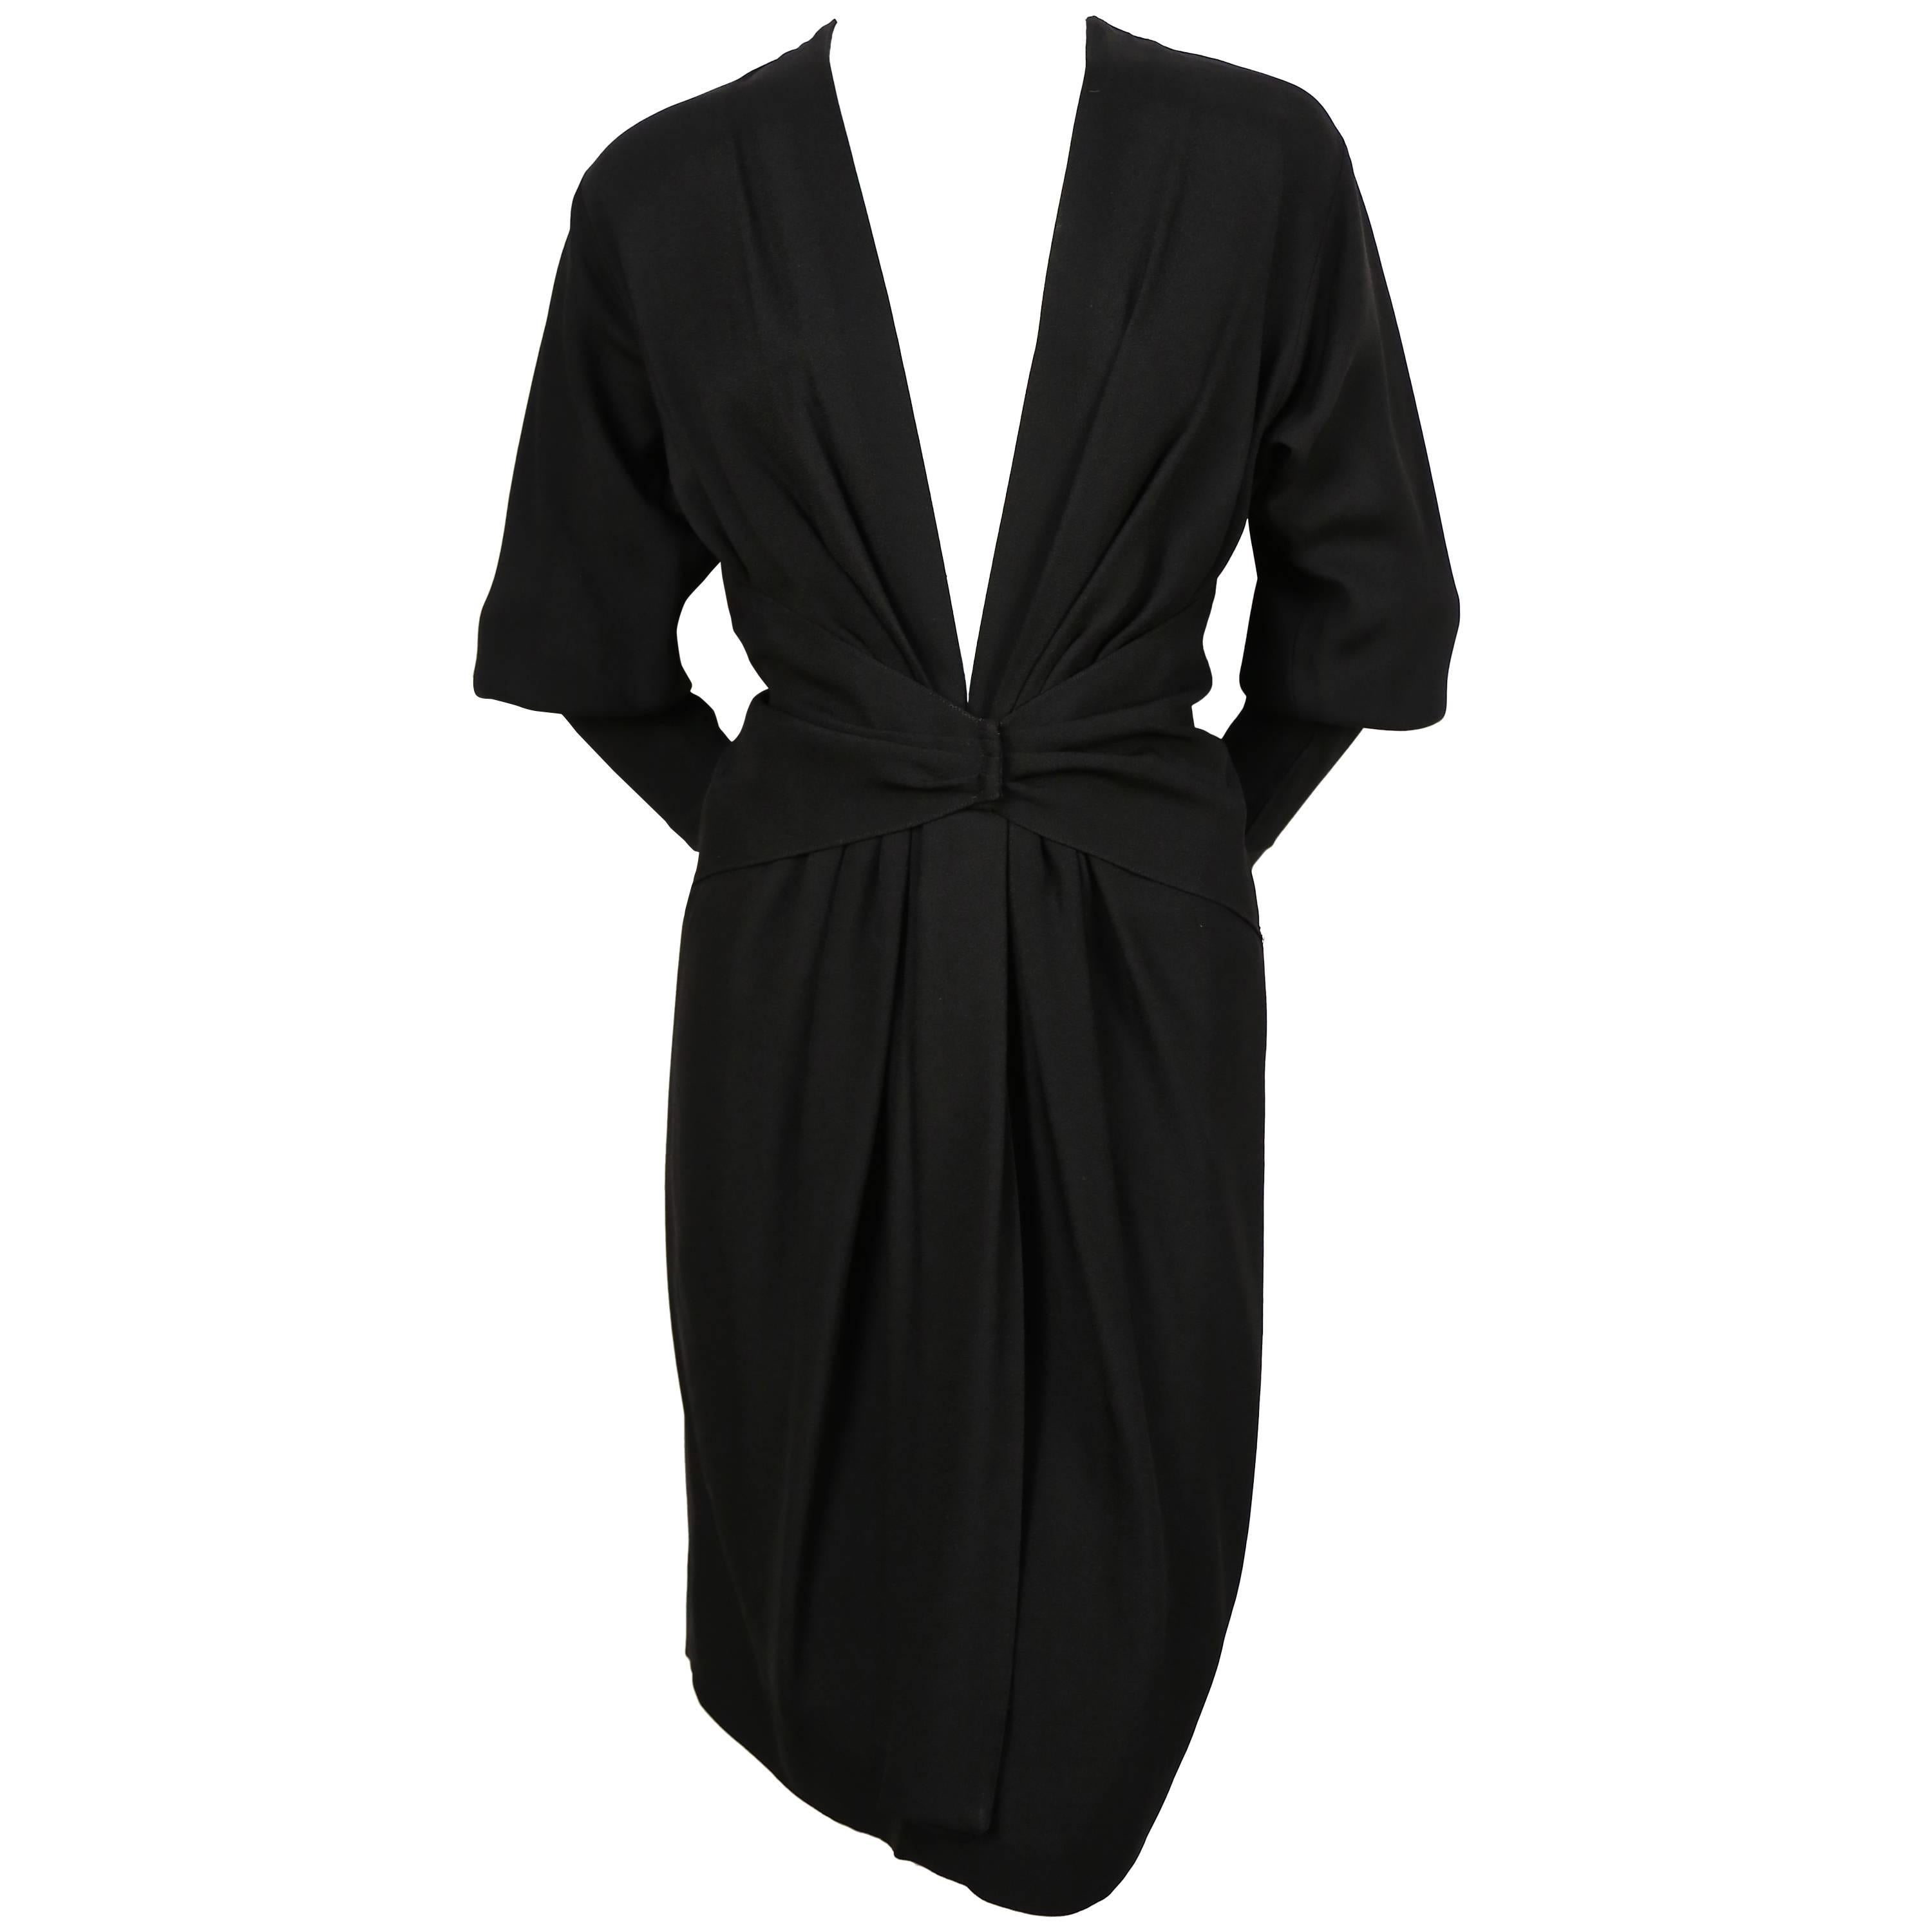 1970's SAINT LAURENT black dress with plunging neckline and draped 